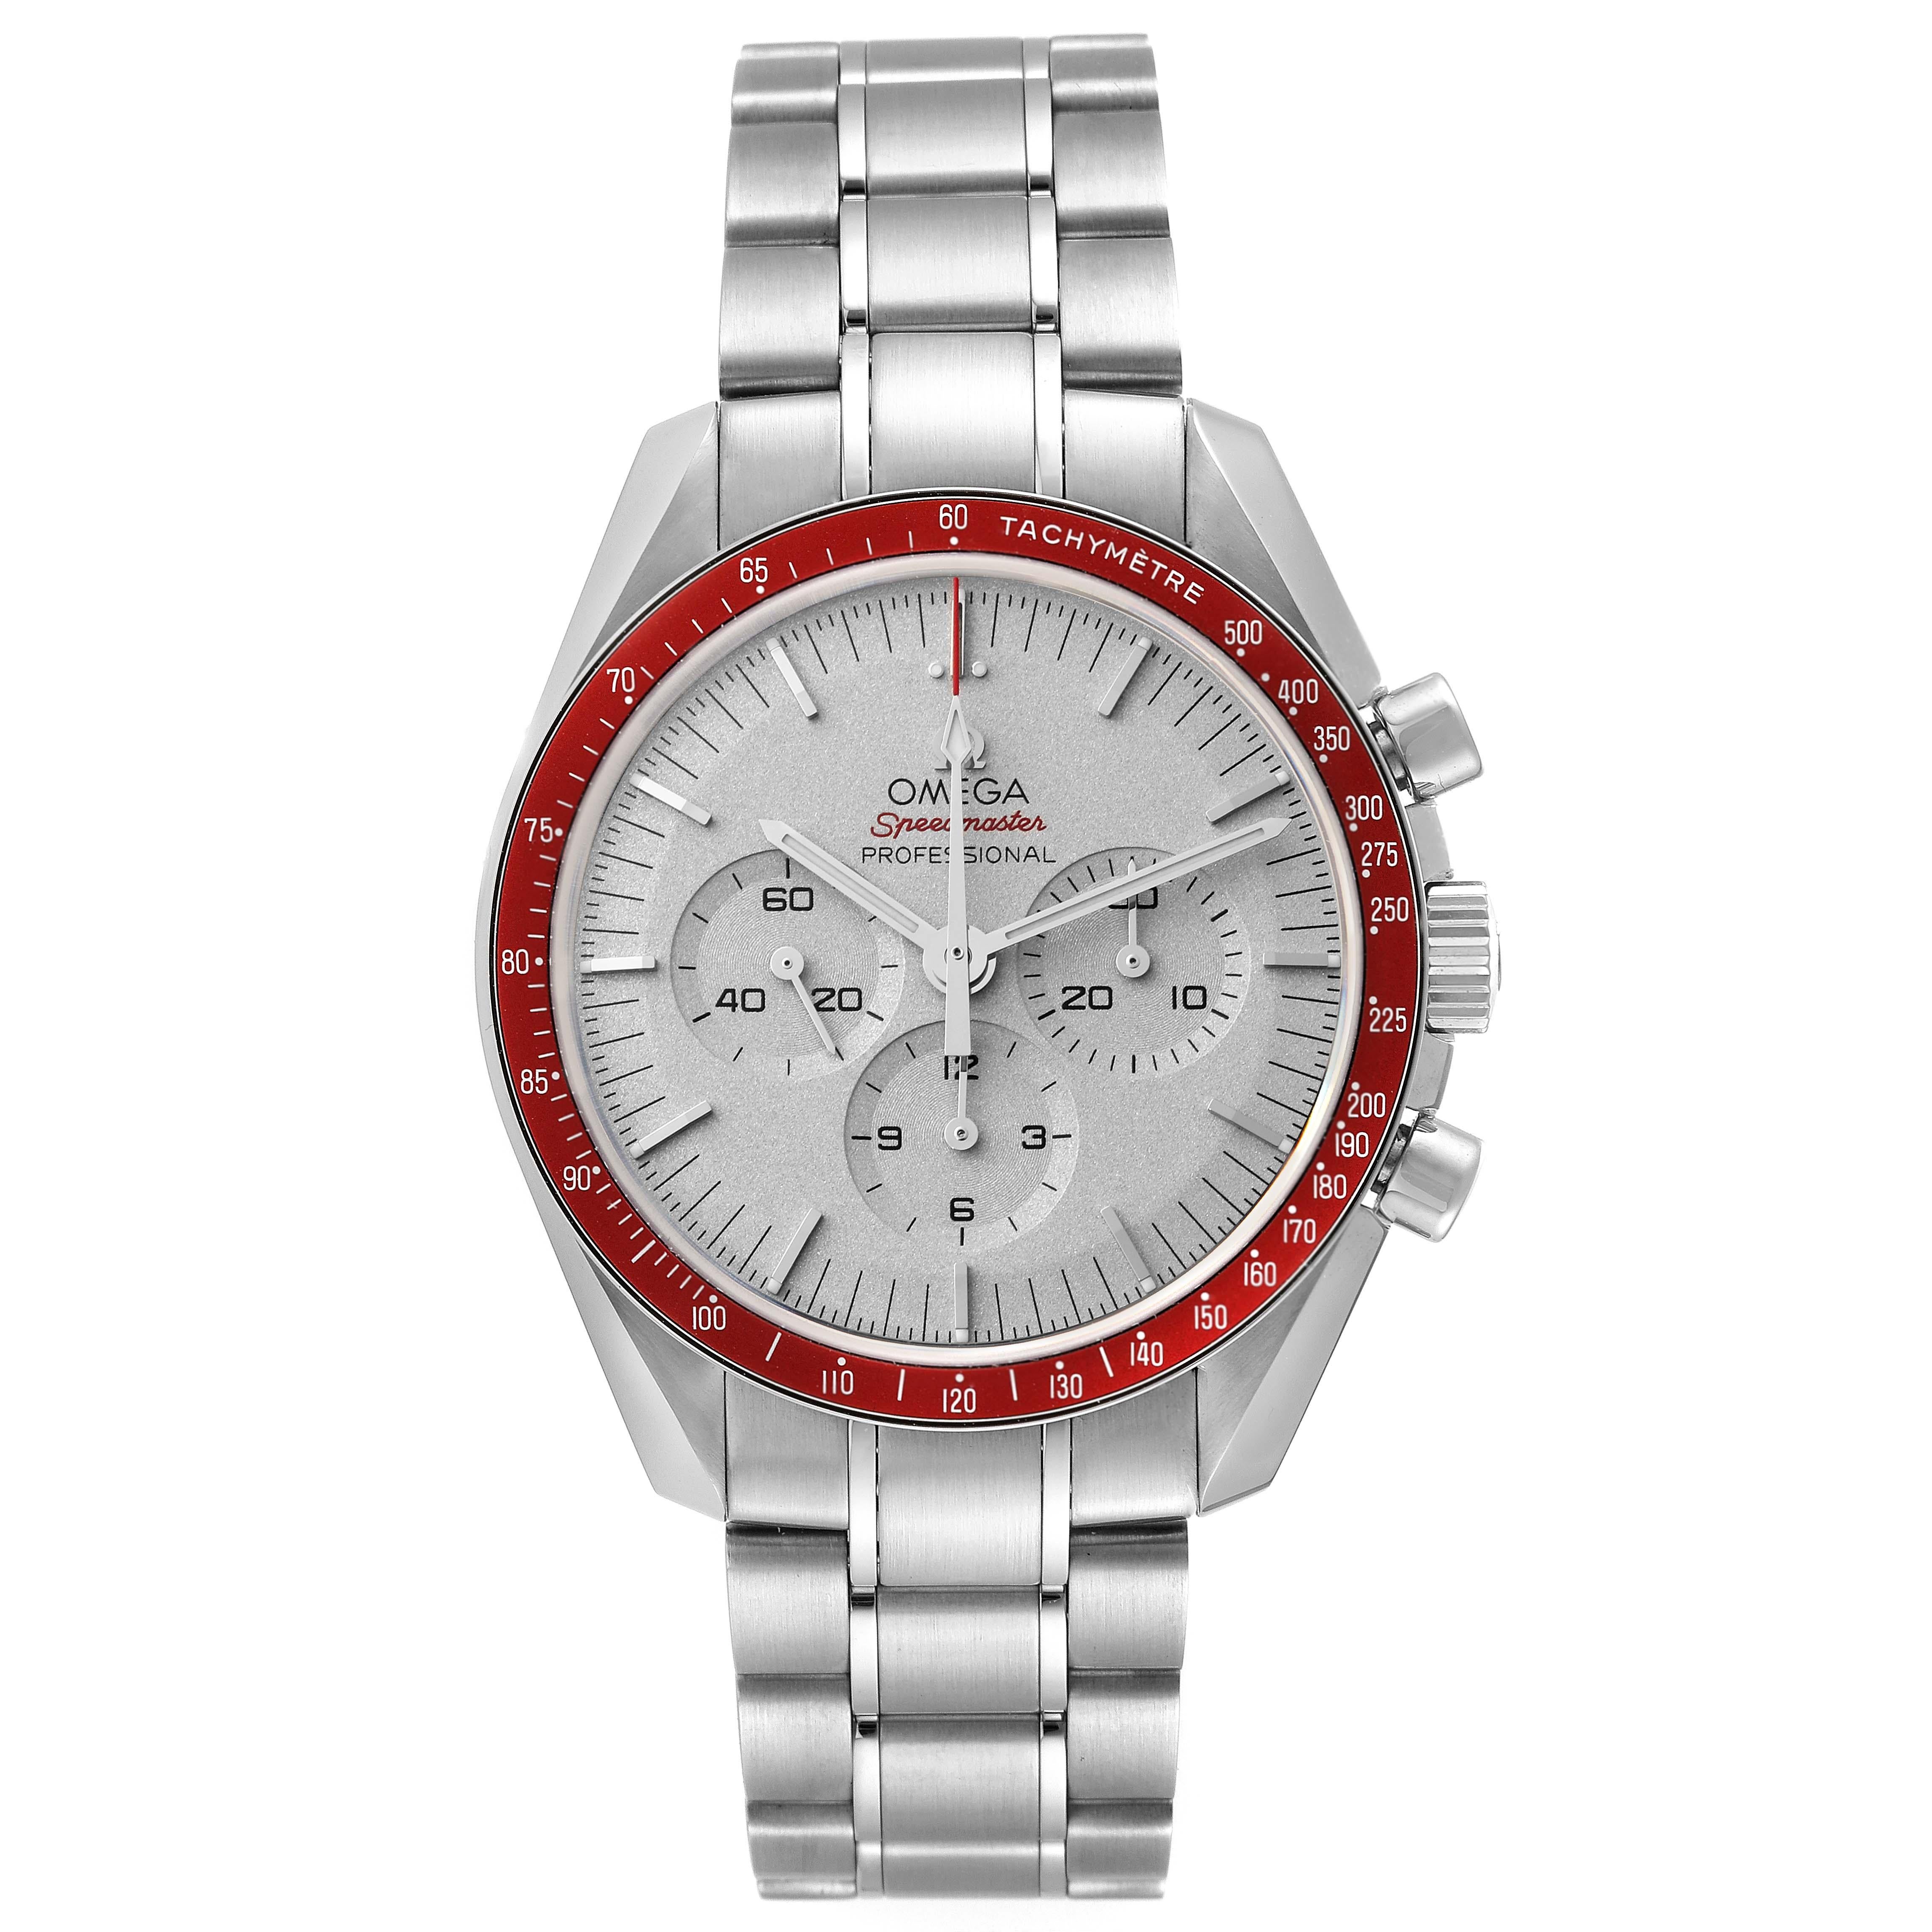 Omega Speedmaster Tokyo 2020 Olympics Limited Edition Mens Watch 522.30.42.30.06.001 Unworn. Manual winding chronograph movement. Stainless steel round case 42.0 mm in diameter. Case back engraved with Tokyo Olympics 2020 logo. Stainless steel bezel